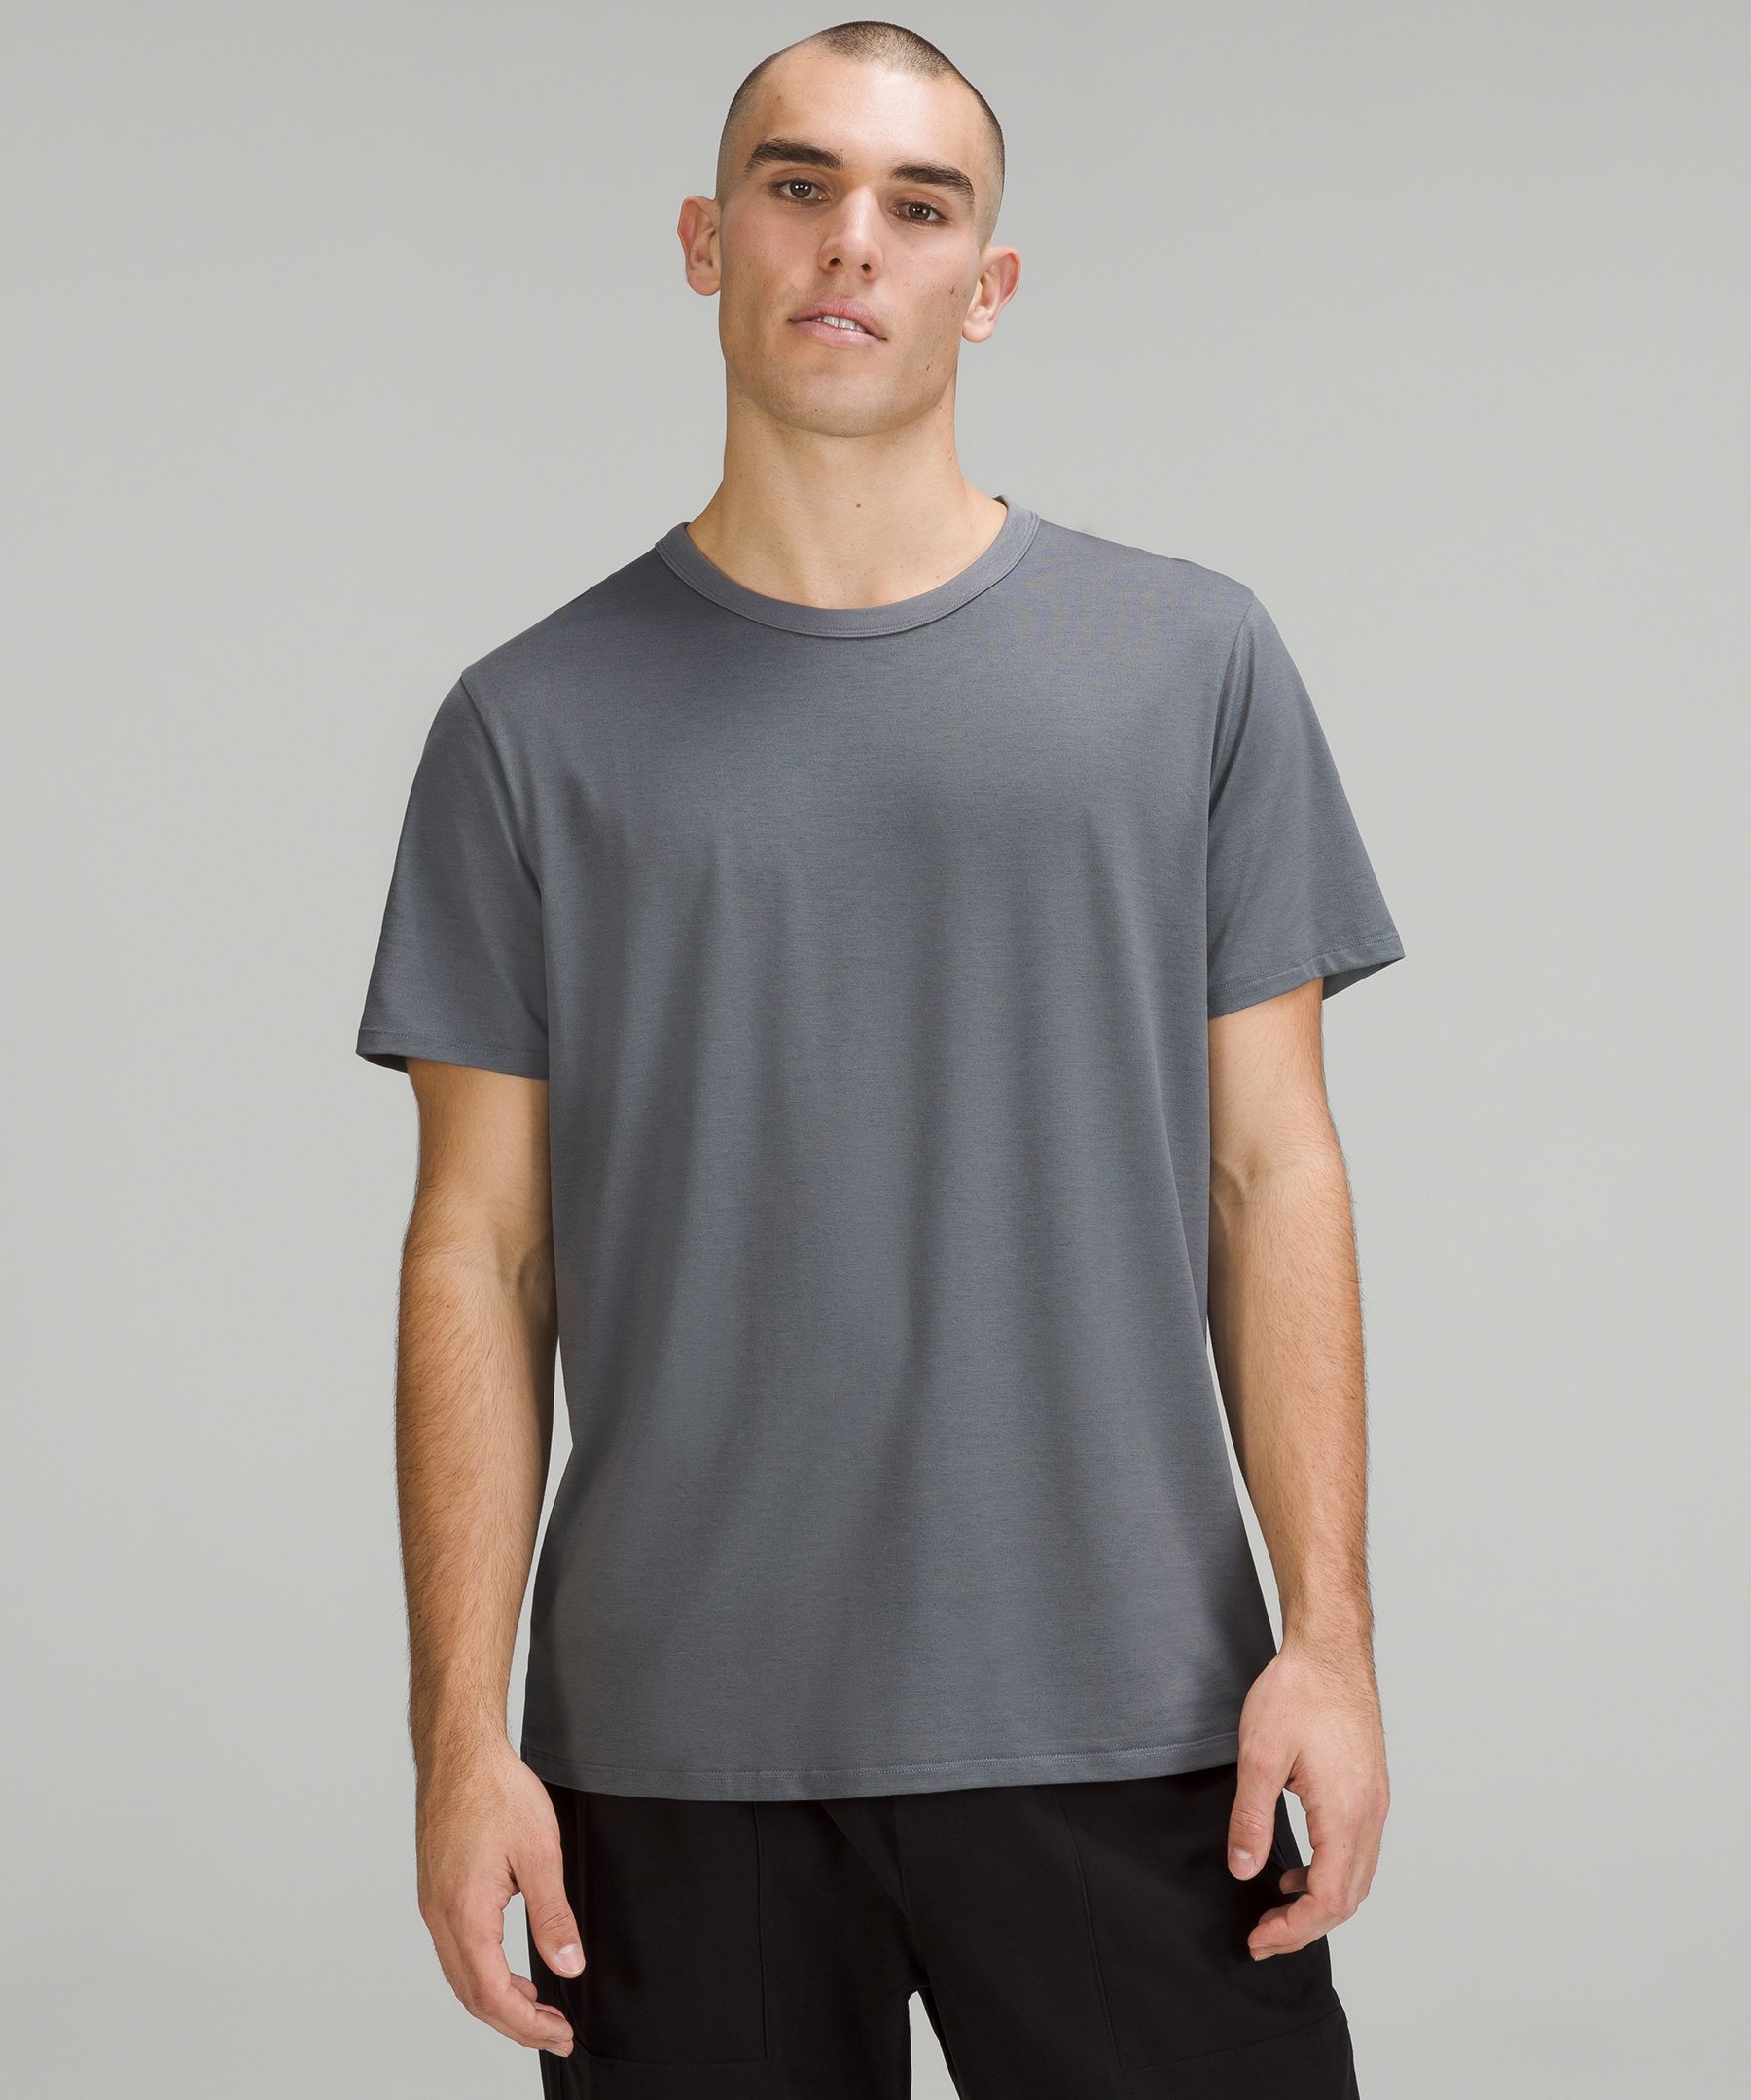 Men's On The Move Clothes | lululemon